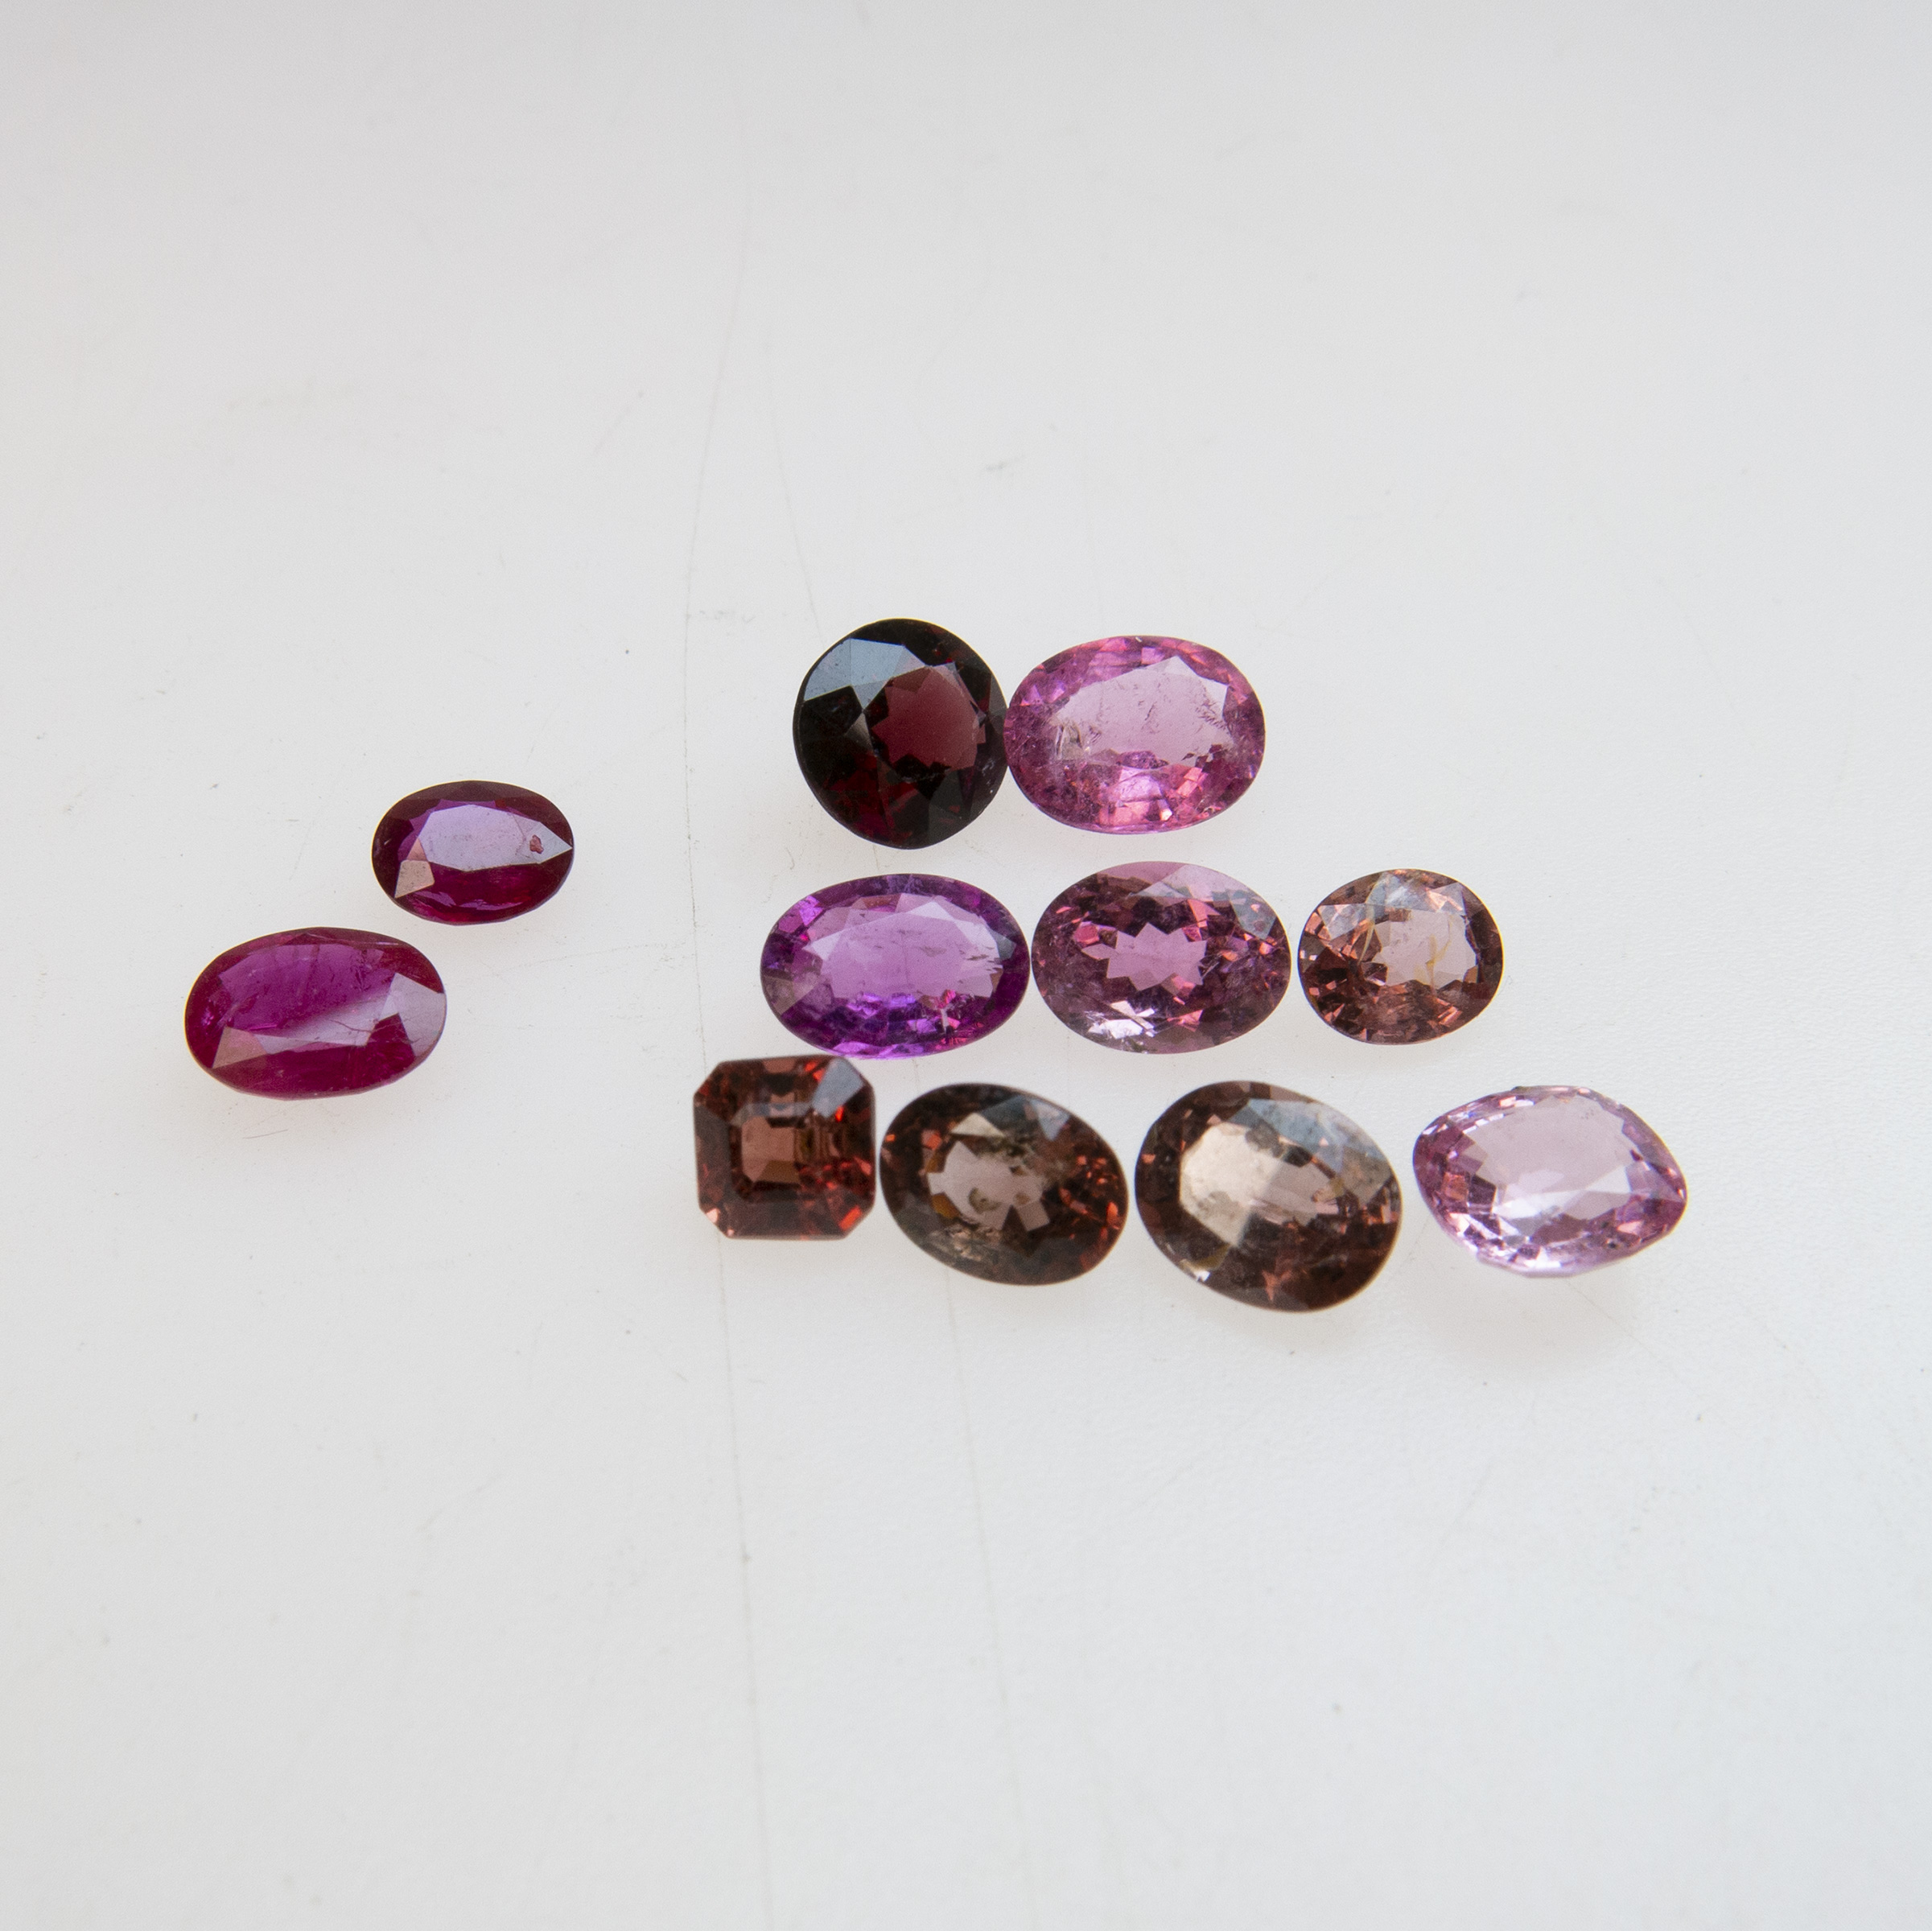 Two Unmounted Oval Cut Rubies And Nine Unmounted Various Cut Spinels